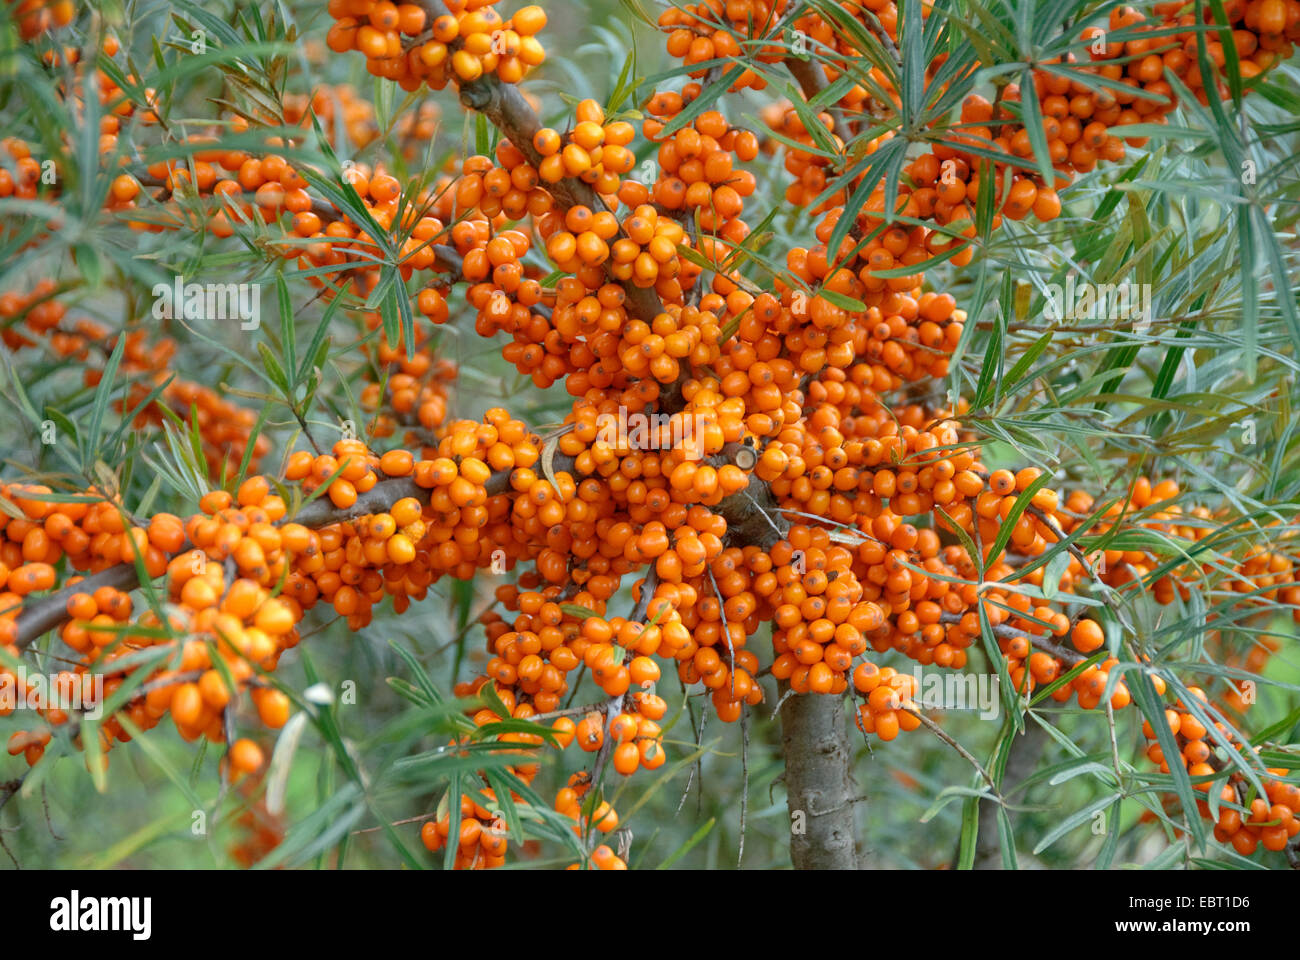 common seabuckthorn (Hippophae rhamnoides 'Orange Energy', Hippophae rhamnoides Orange Energy), cultivar orange Energy, branches with fruits Stock Photo